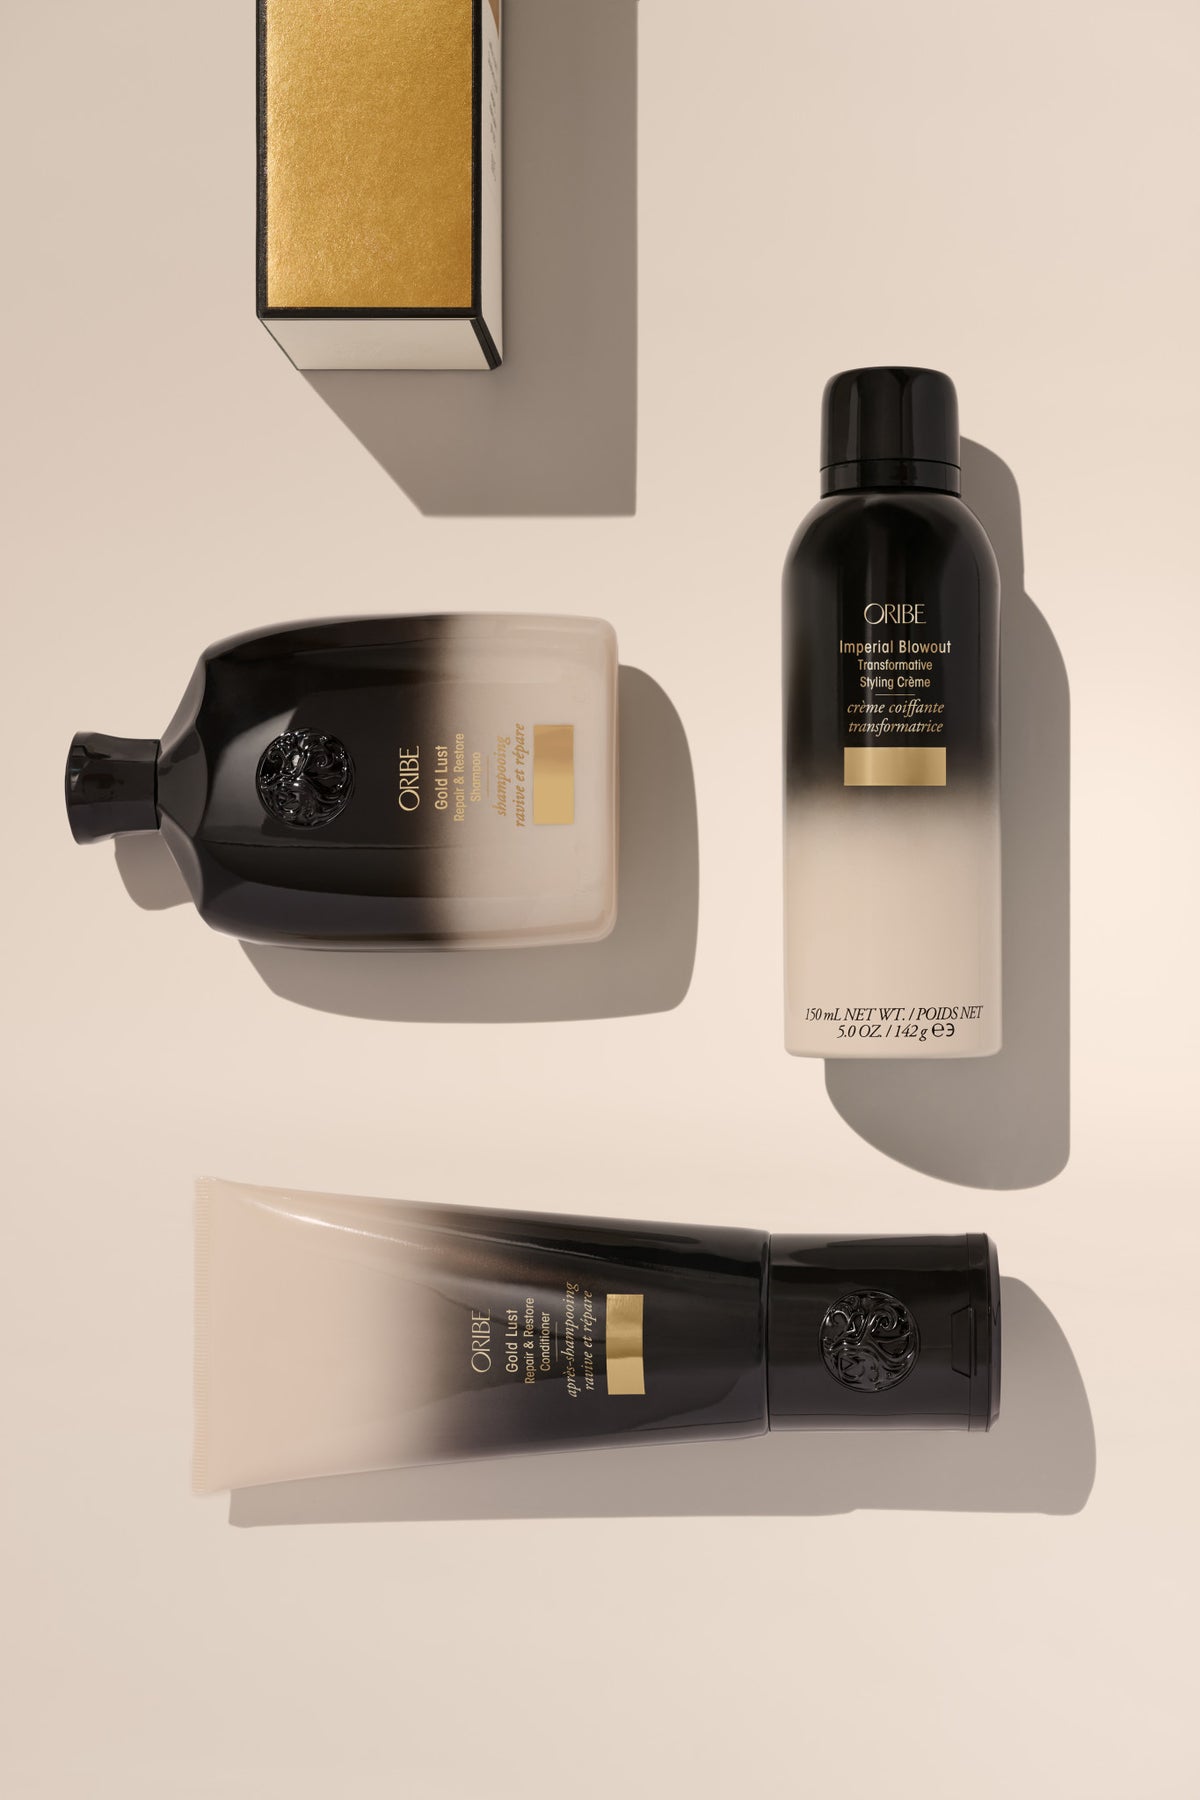 Oribe Imperial Blowout Transformative Styling Crème .